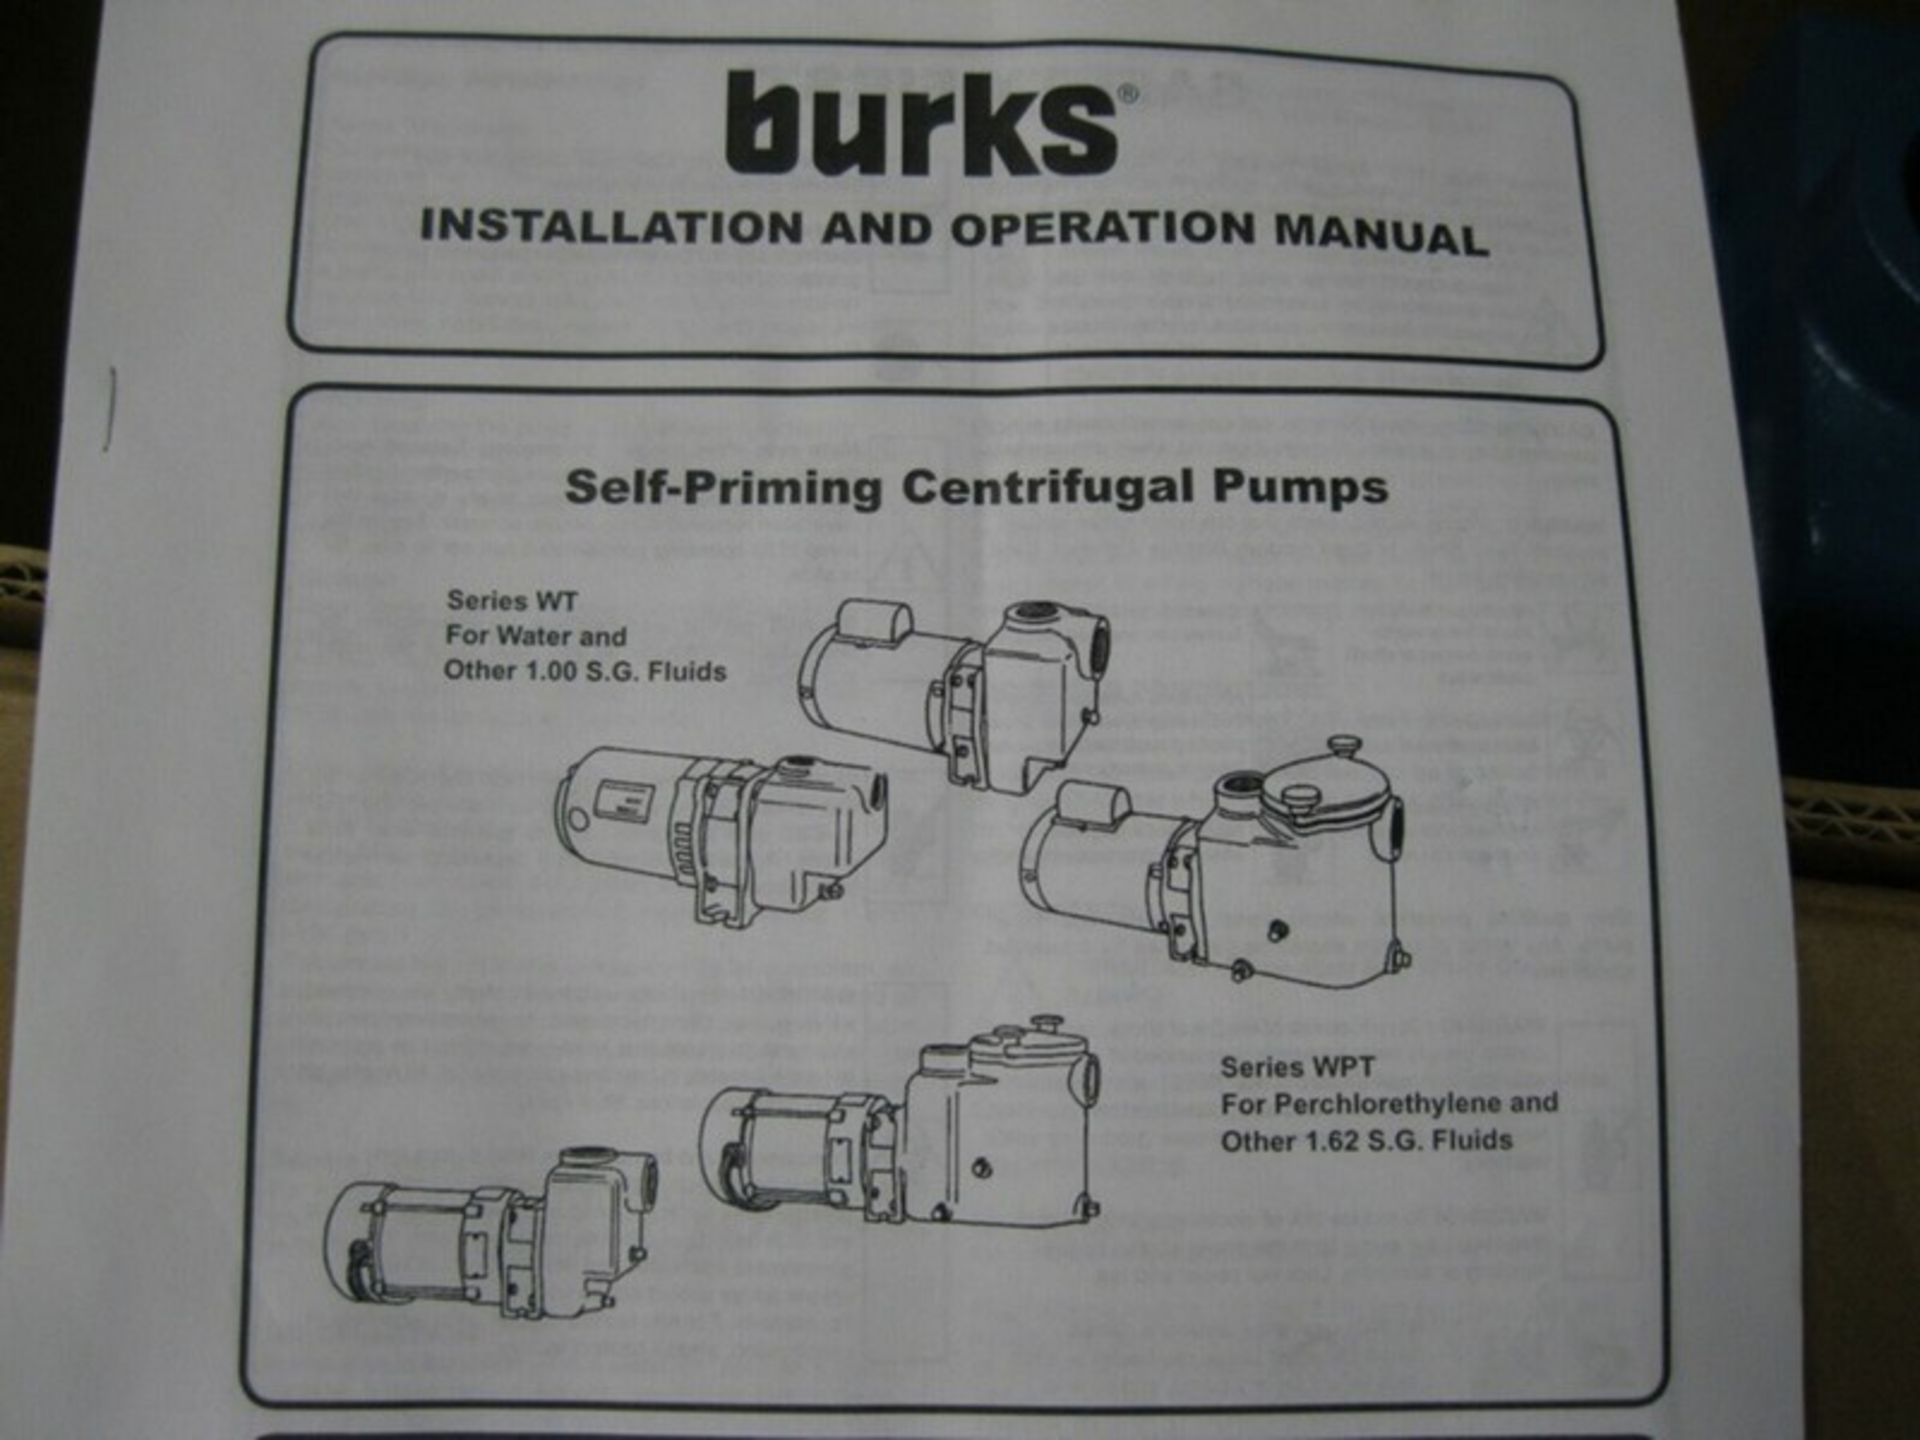 2" Crane Burks 5WT5X -09PI00 Self-Priming Centrifugal Pump 1/2 HP NEW (NOTE: Packing and - Image 8 of 8